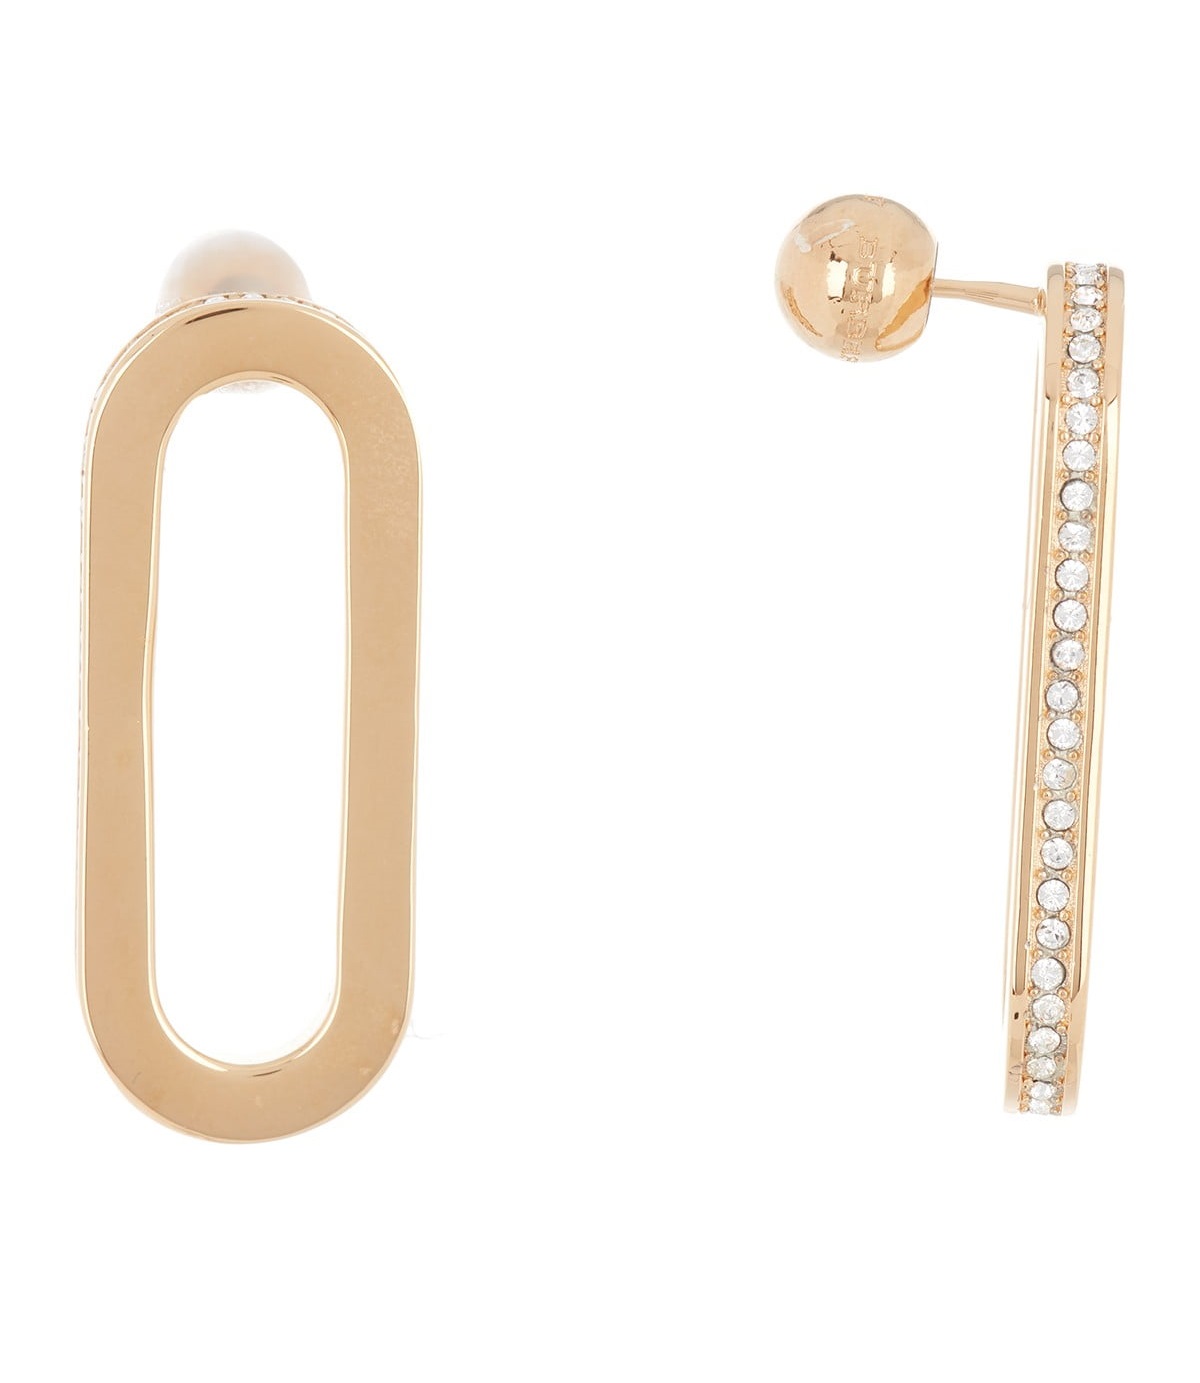 Burberry Ladies Crystal Oval Link Earrings In Gold Tone